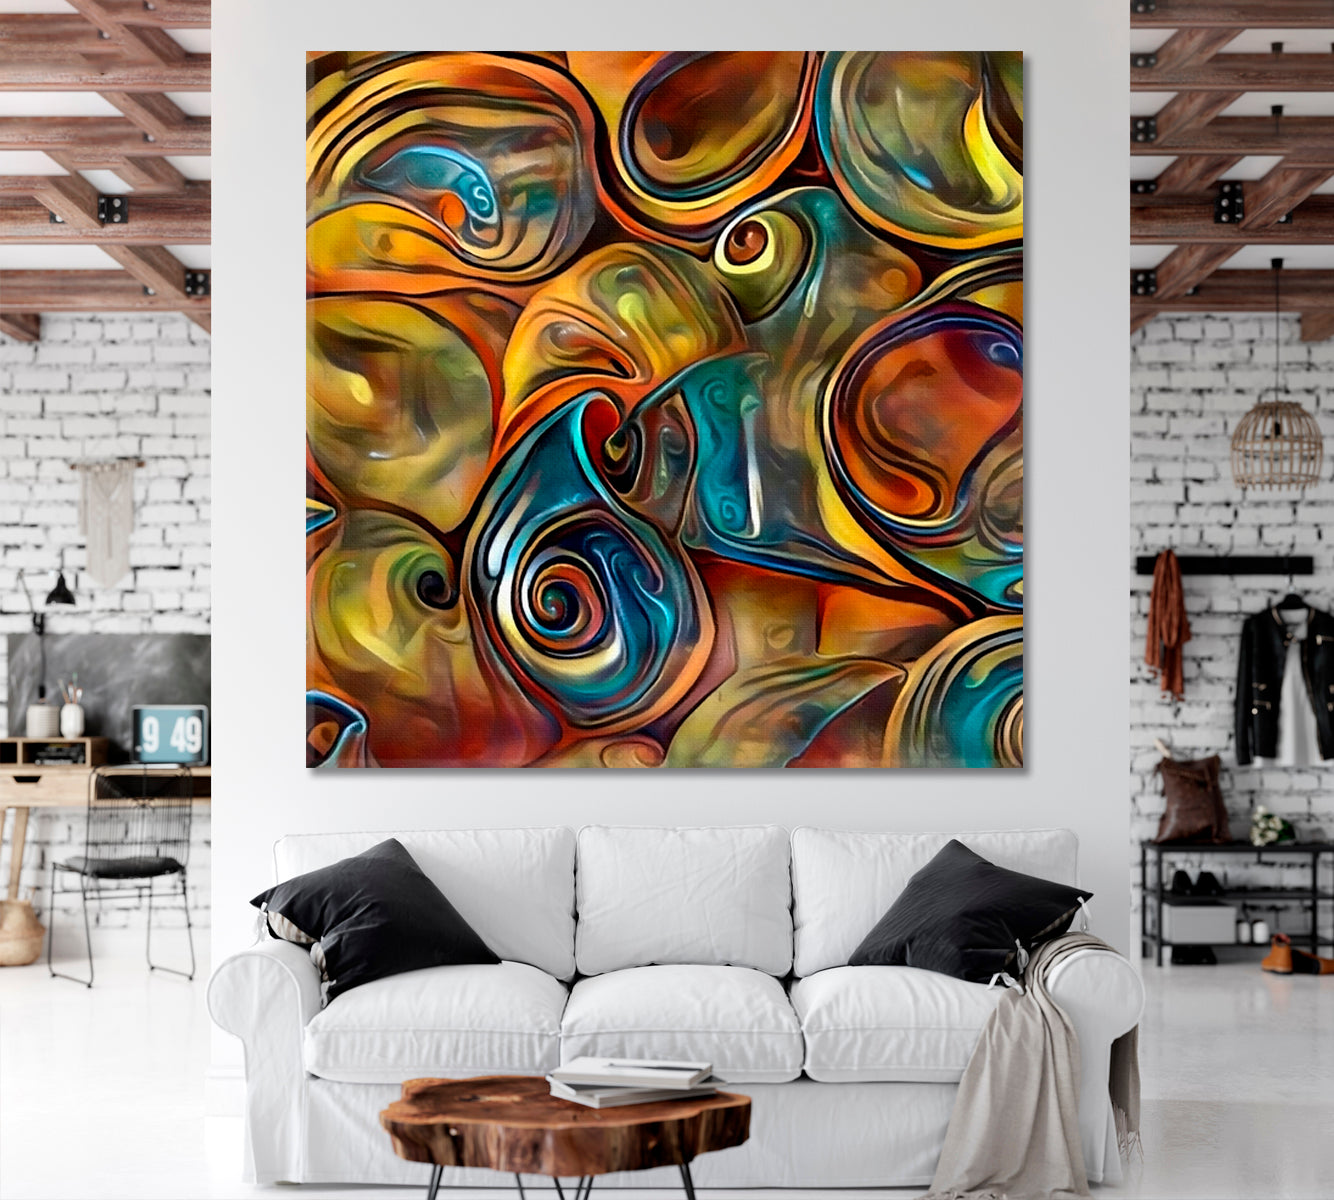 ABSTRACT SEASHELLS  Fluid Lines and Color Movement - Square Panel Abstract Art Print Artesty 1 Panel 12"x12" 